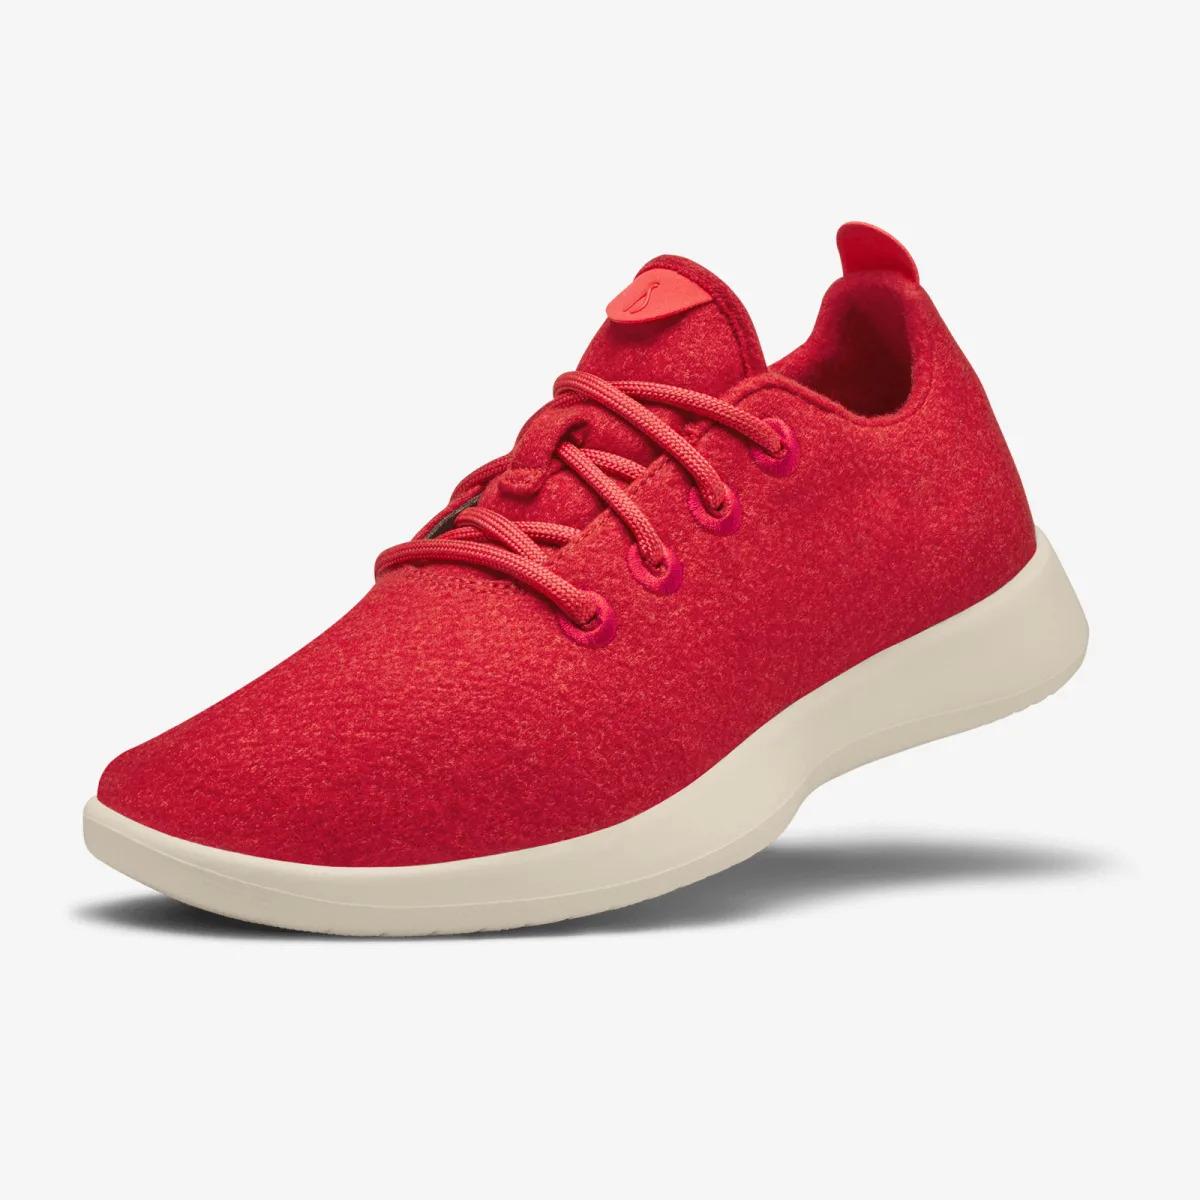 Allbirds Wool Runners Shoes for $66 Shipped